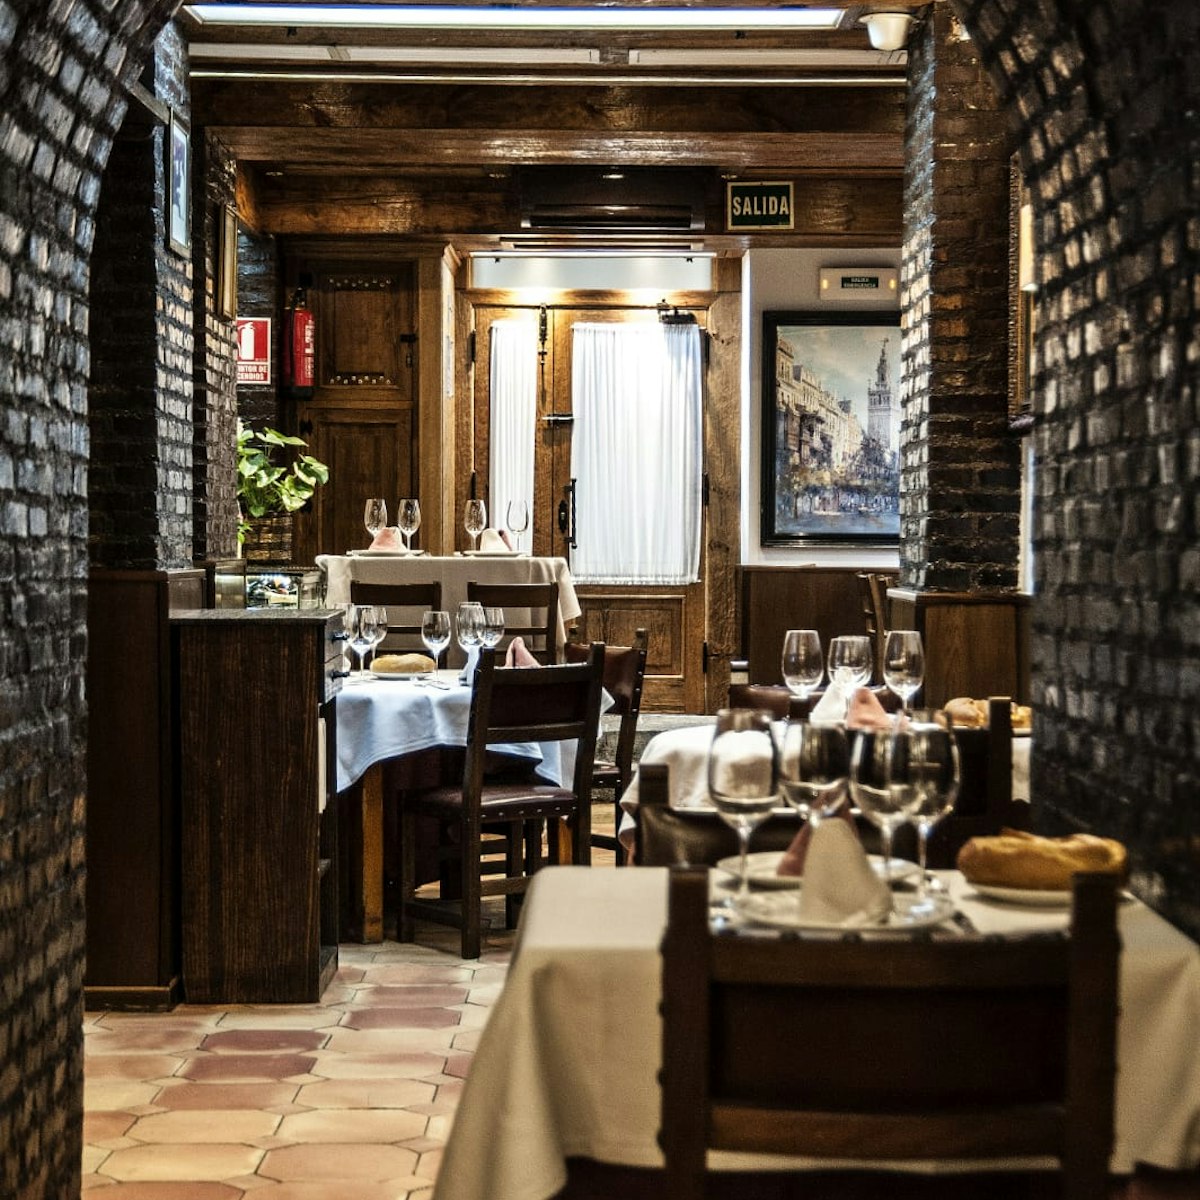 Casa Lucio in Madrid has rustic Spanish cuisine, including egg dishes & bull's tail stew, in a quaint spot opened in 1974.